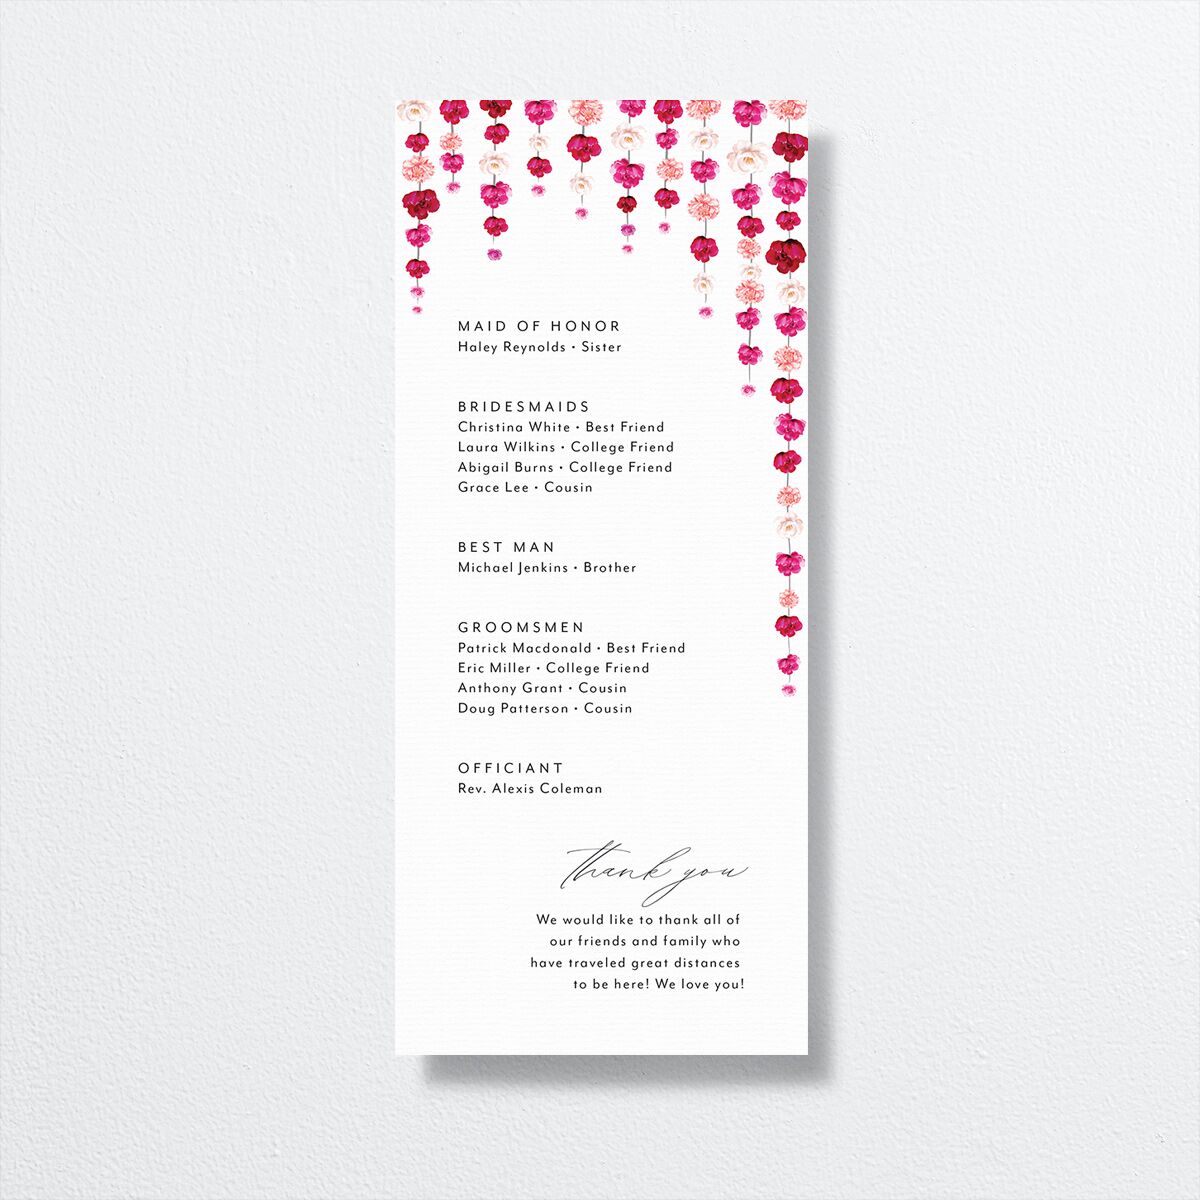 Floral Canopy Wedding Program back in red